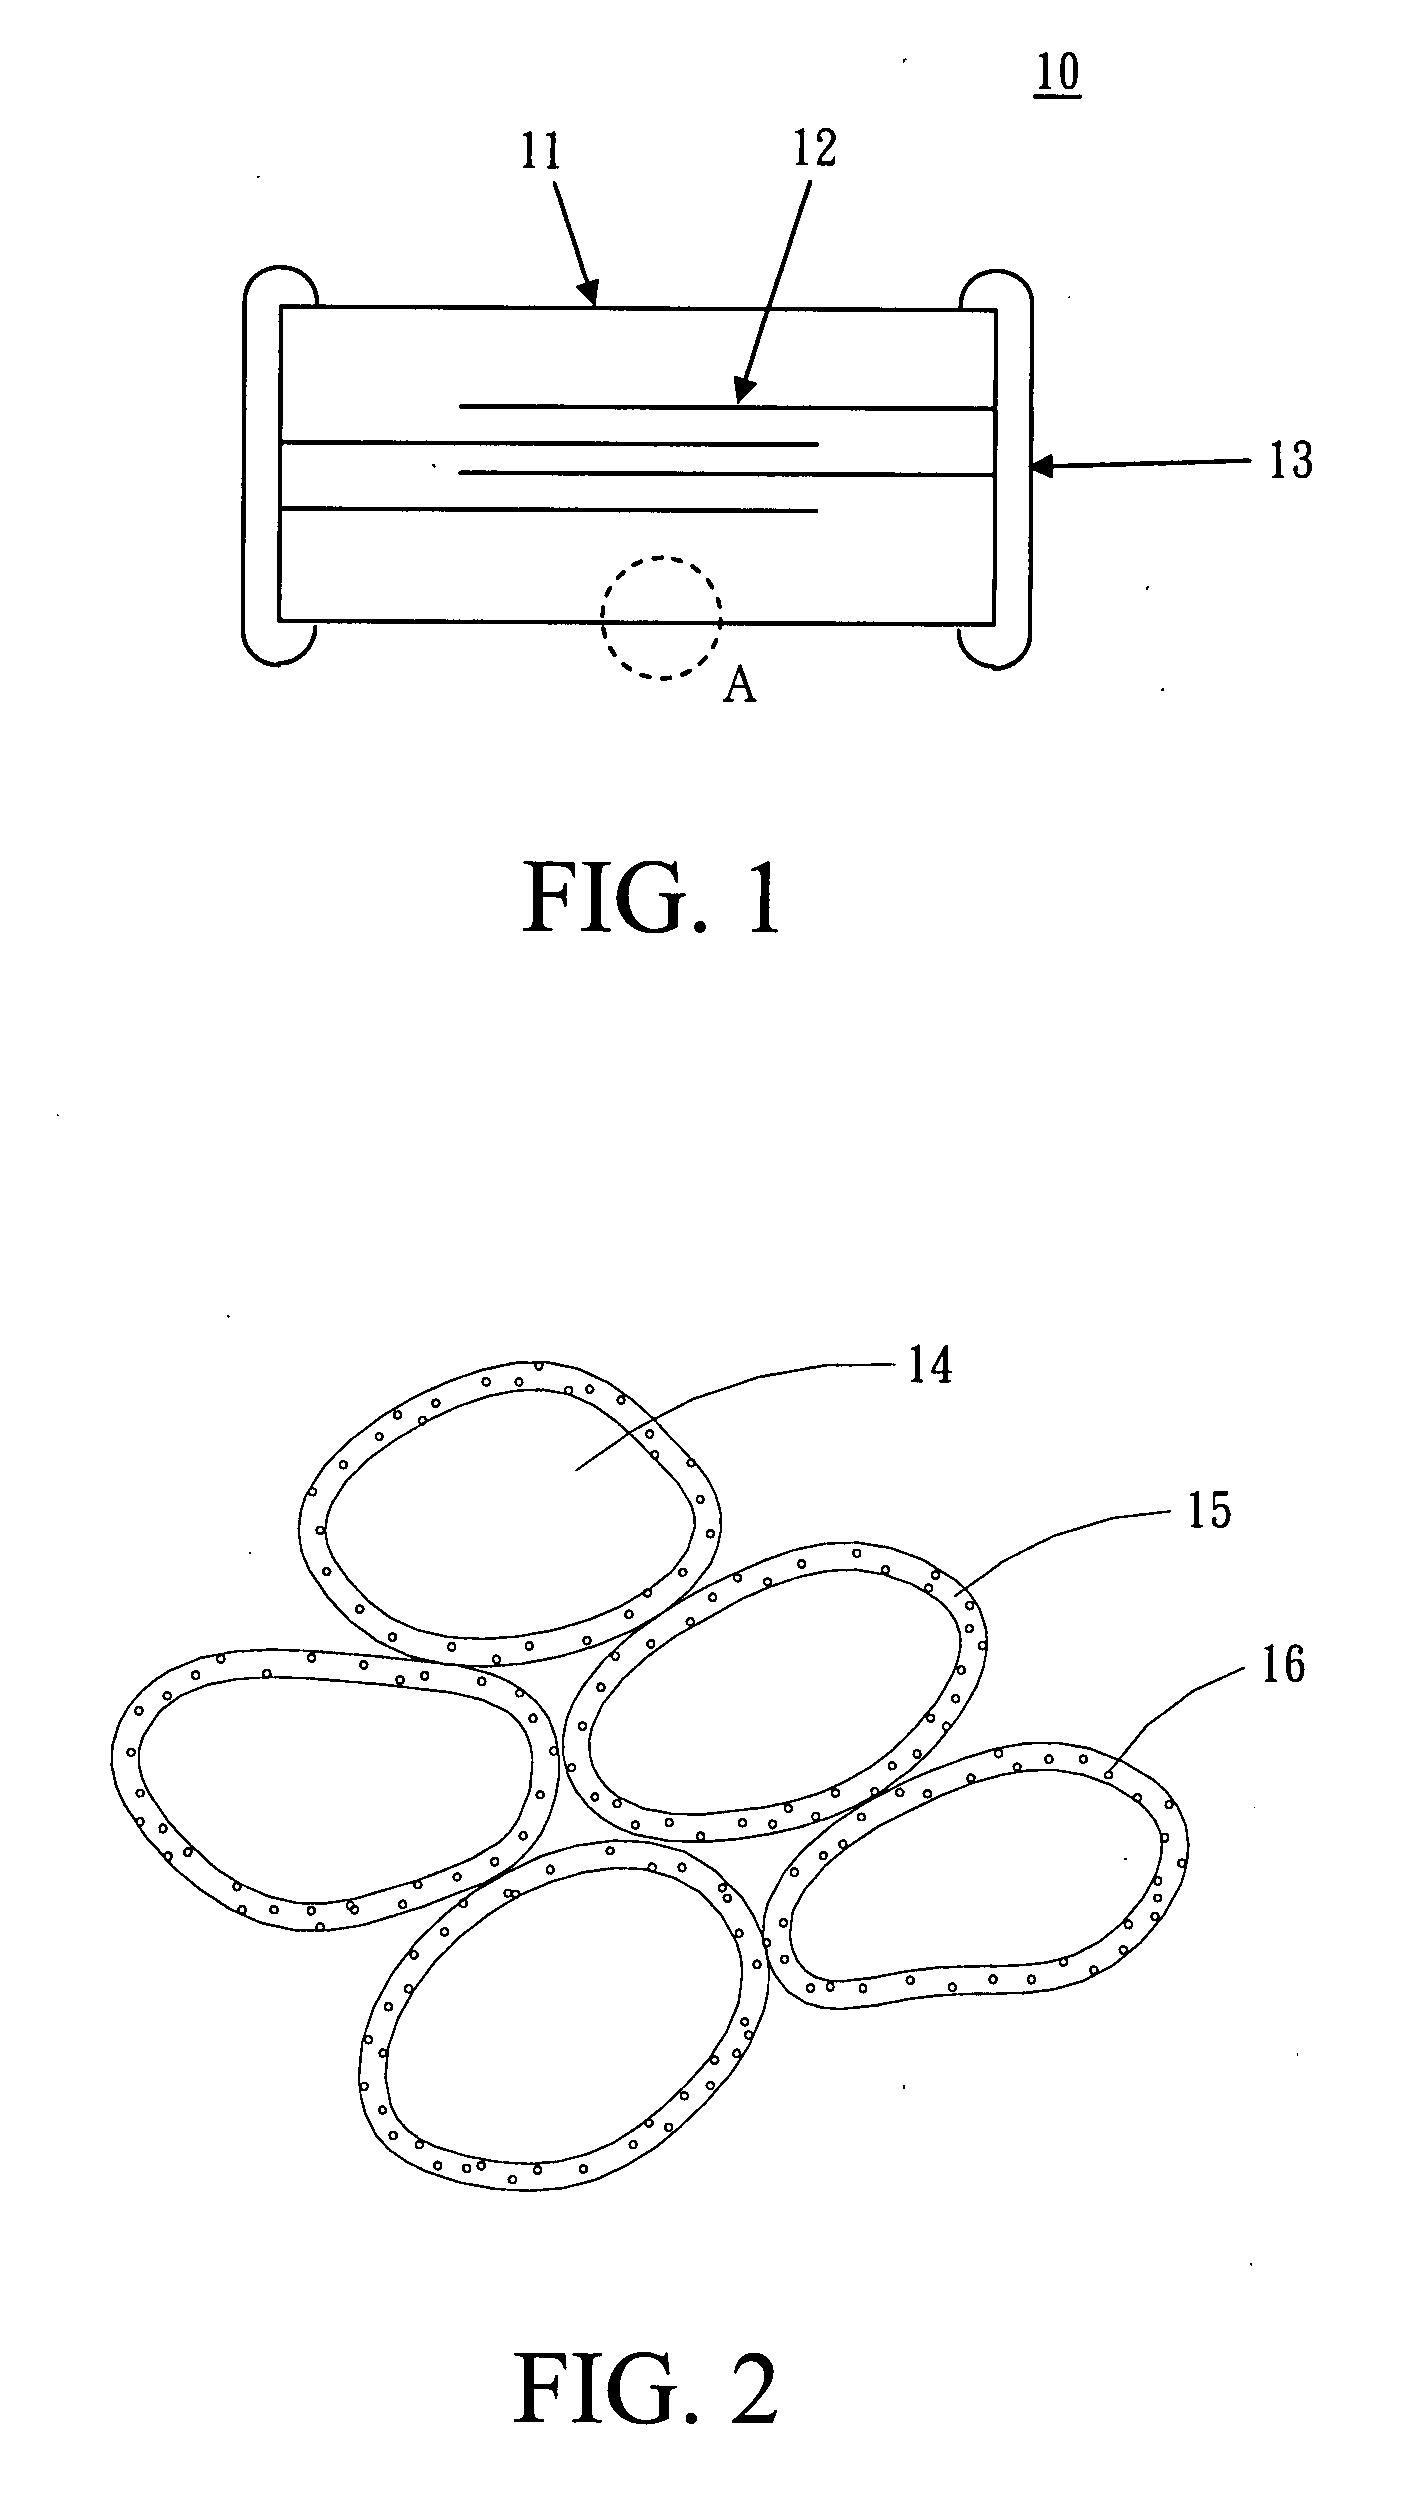 Ceramic material used for protection against electrical overstress and low-capacitance multilayer chip varistor using the same